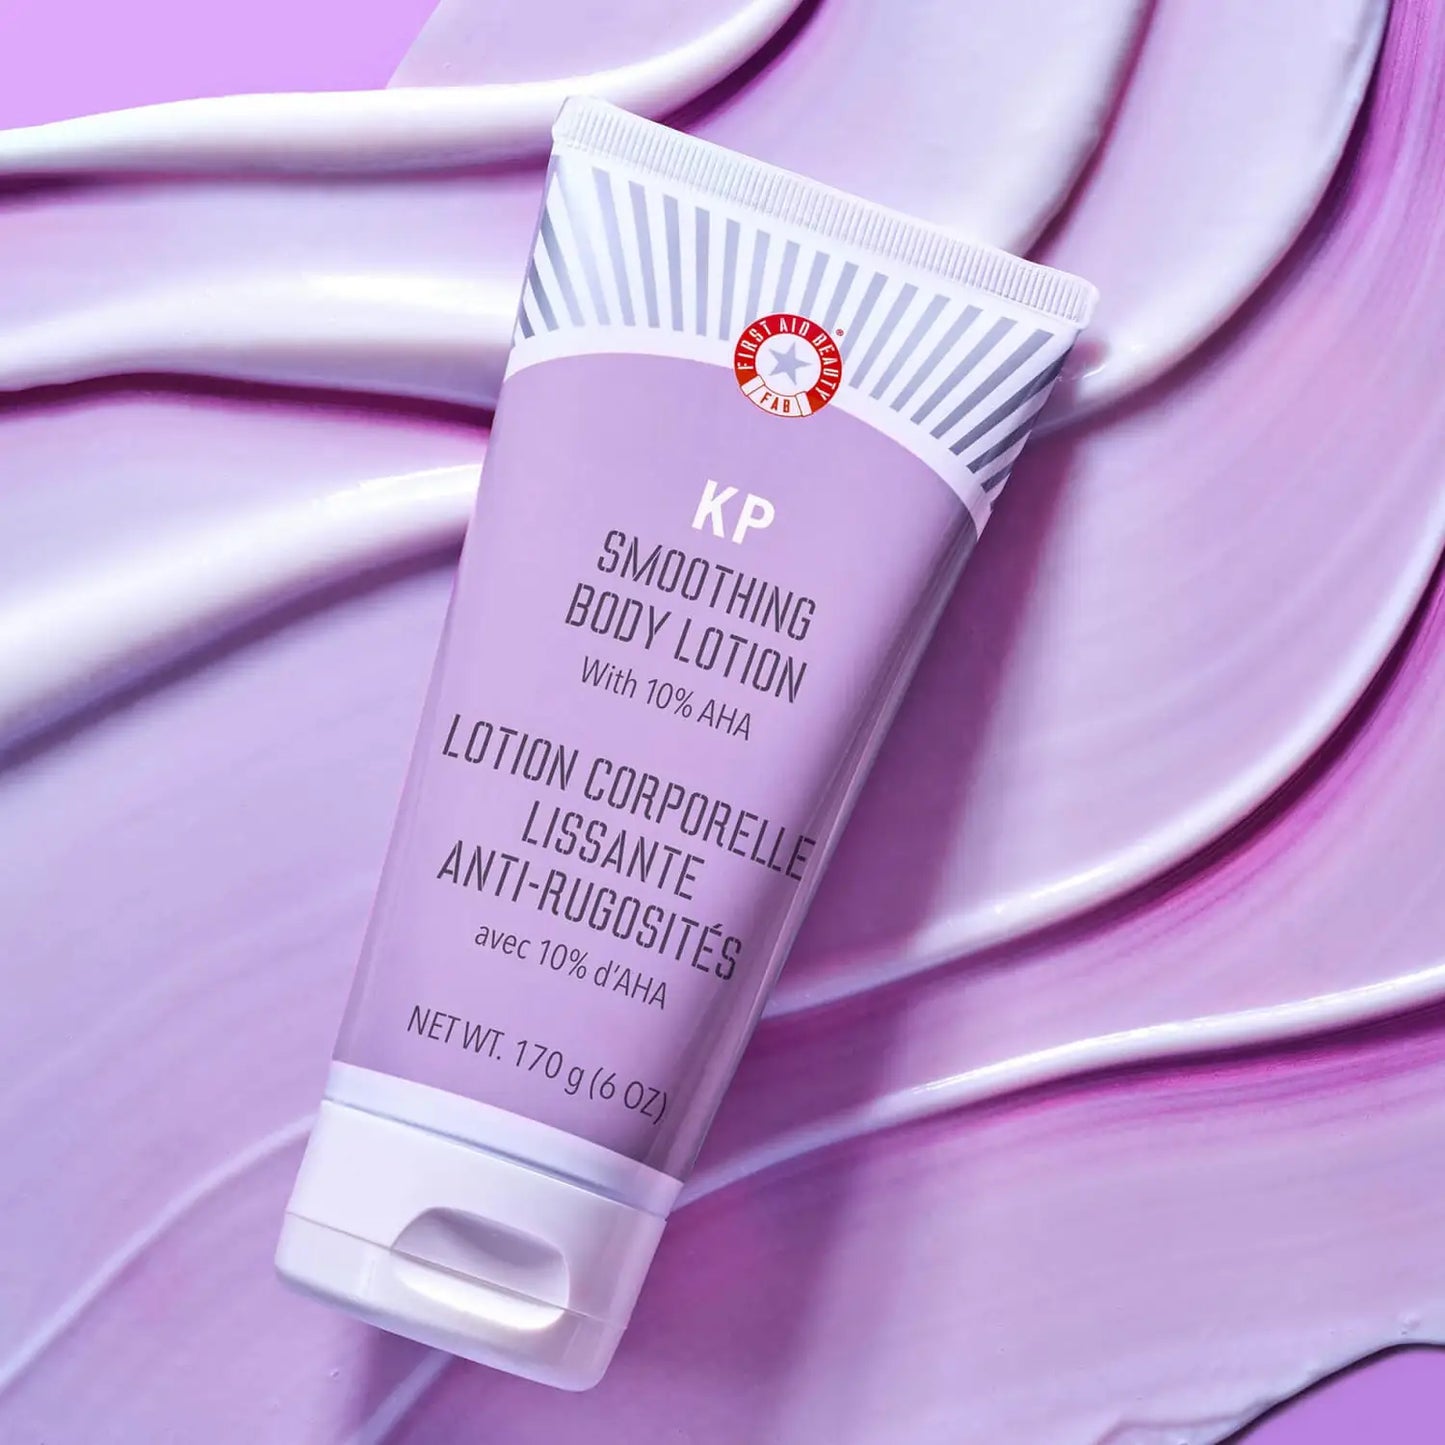 FIRST AID BEAUTY | KP SMOOTHING BODY LOTION WITH 10% AHA